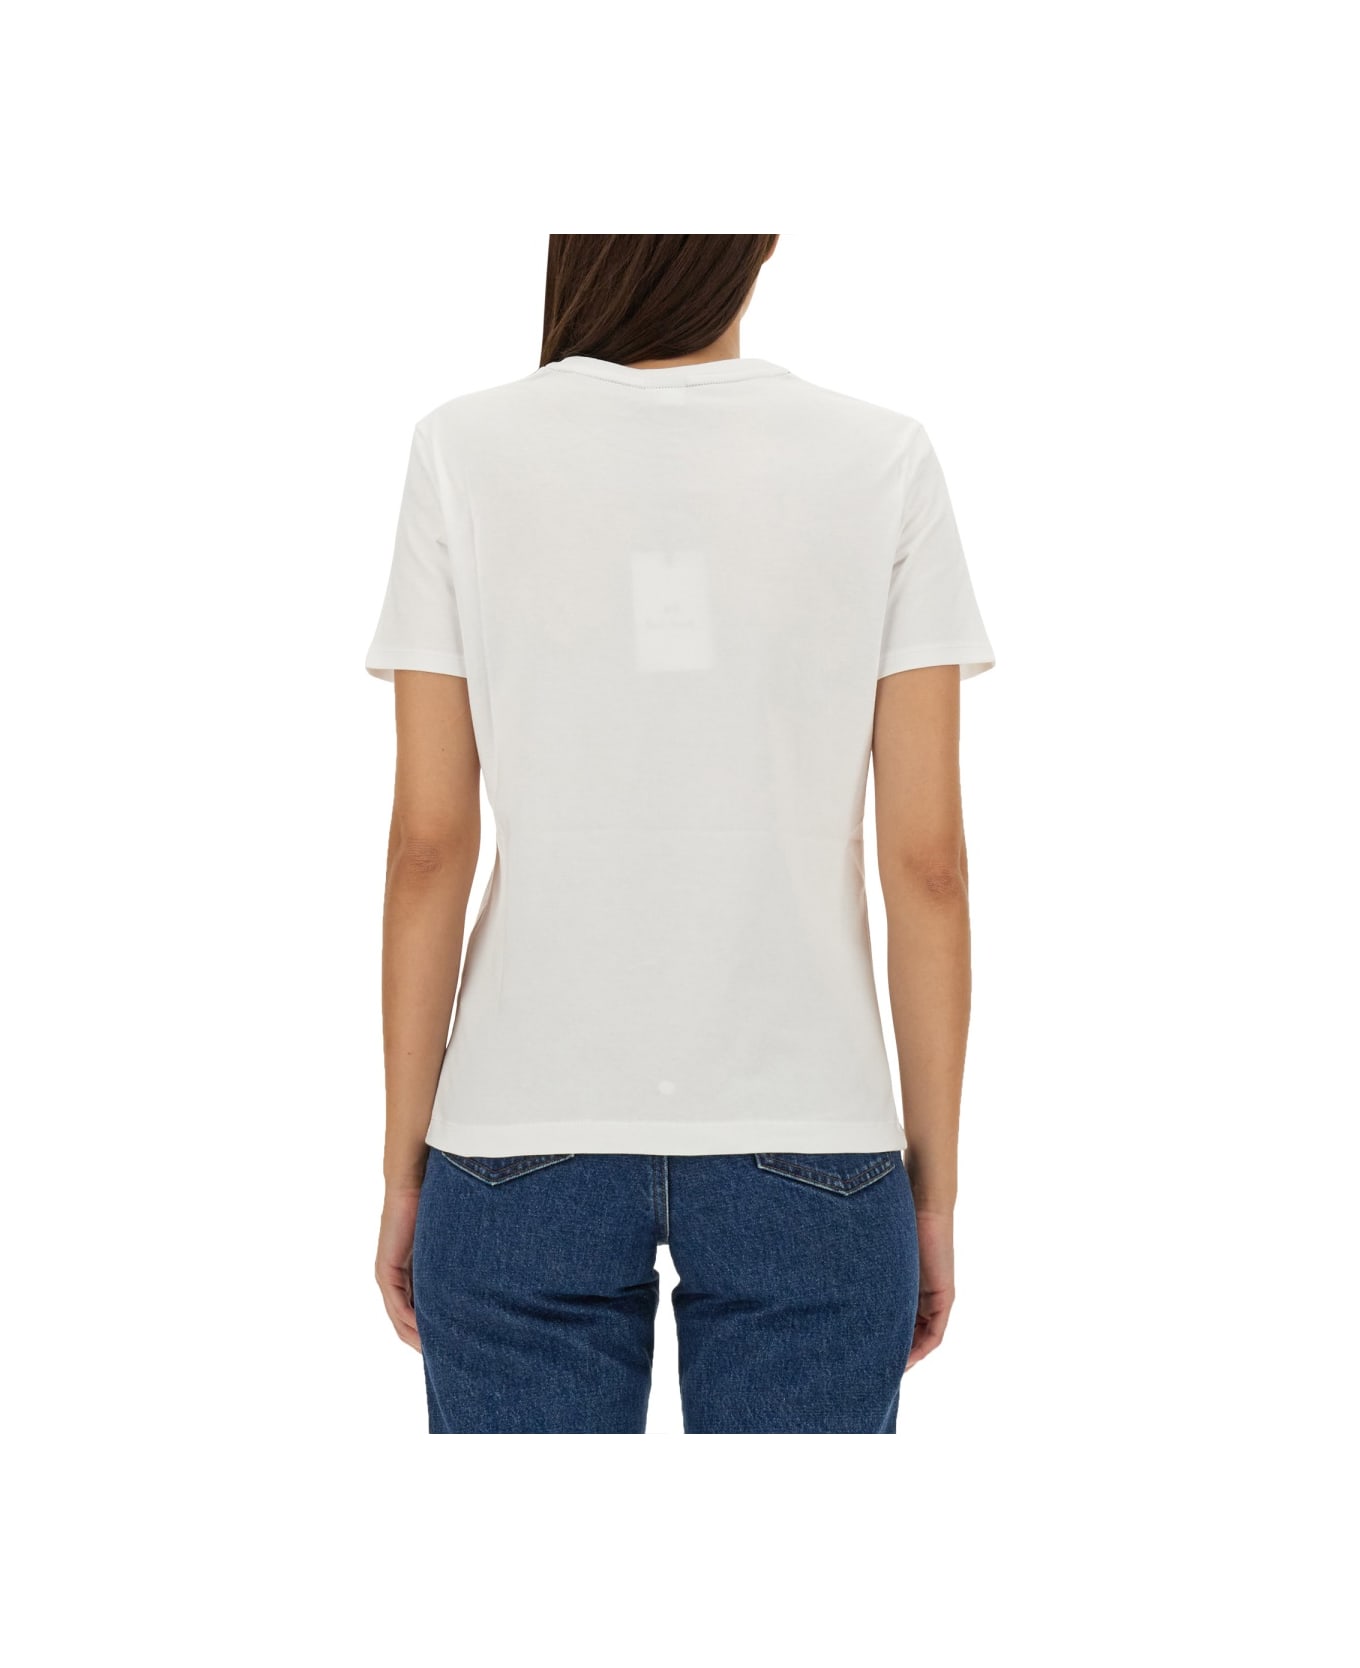 PS by Paul Smith Zebra Patch T-shirt - WHITE Tシャツ